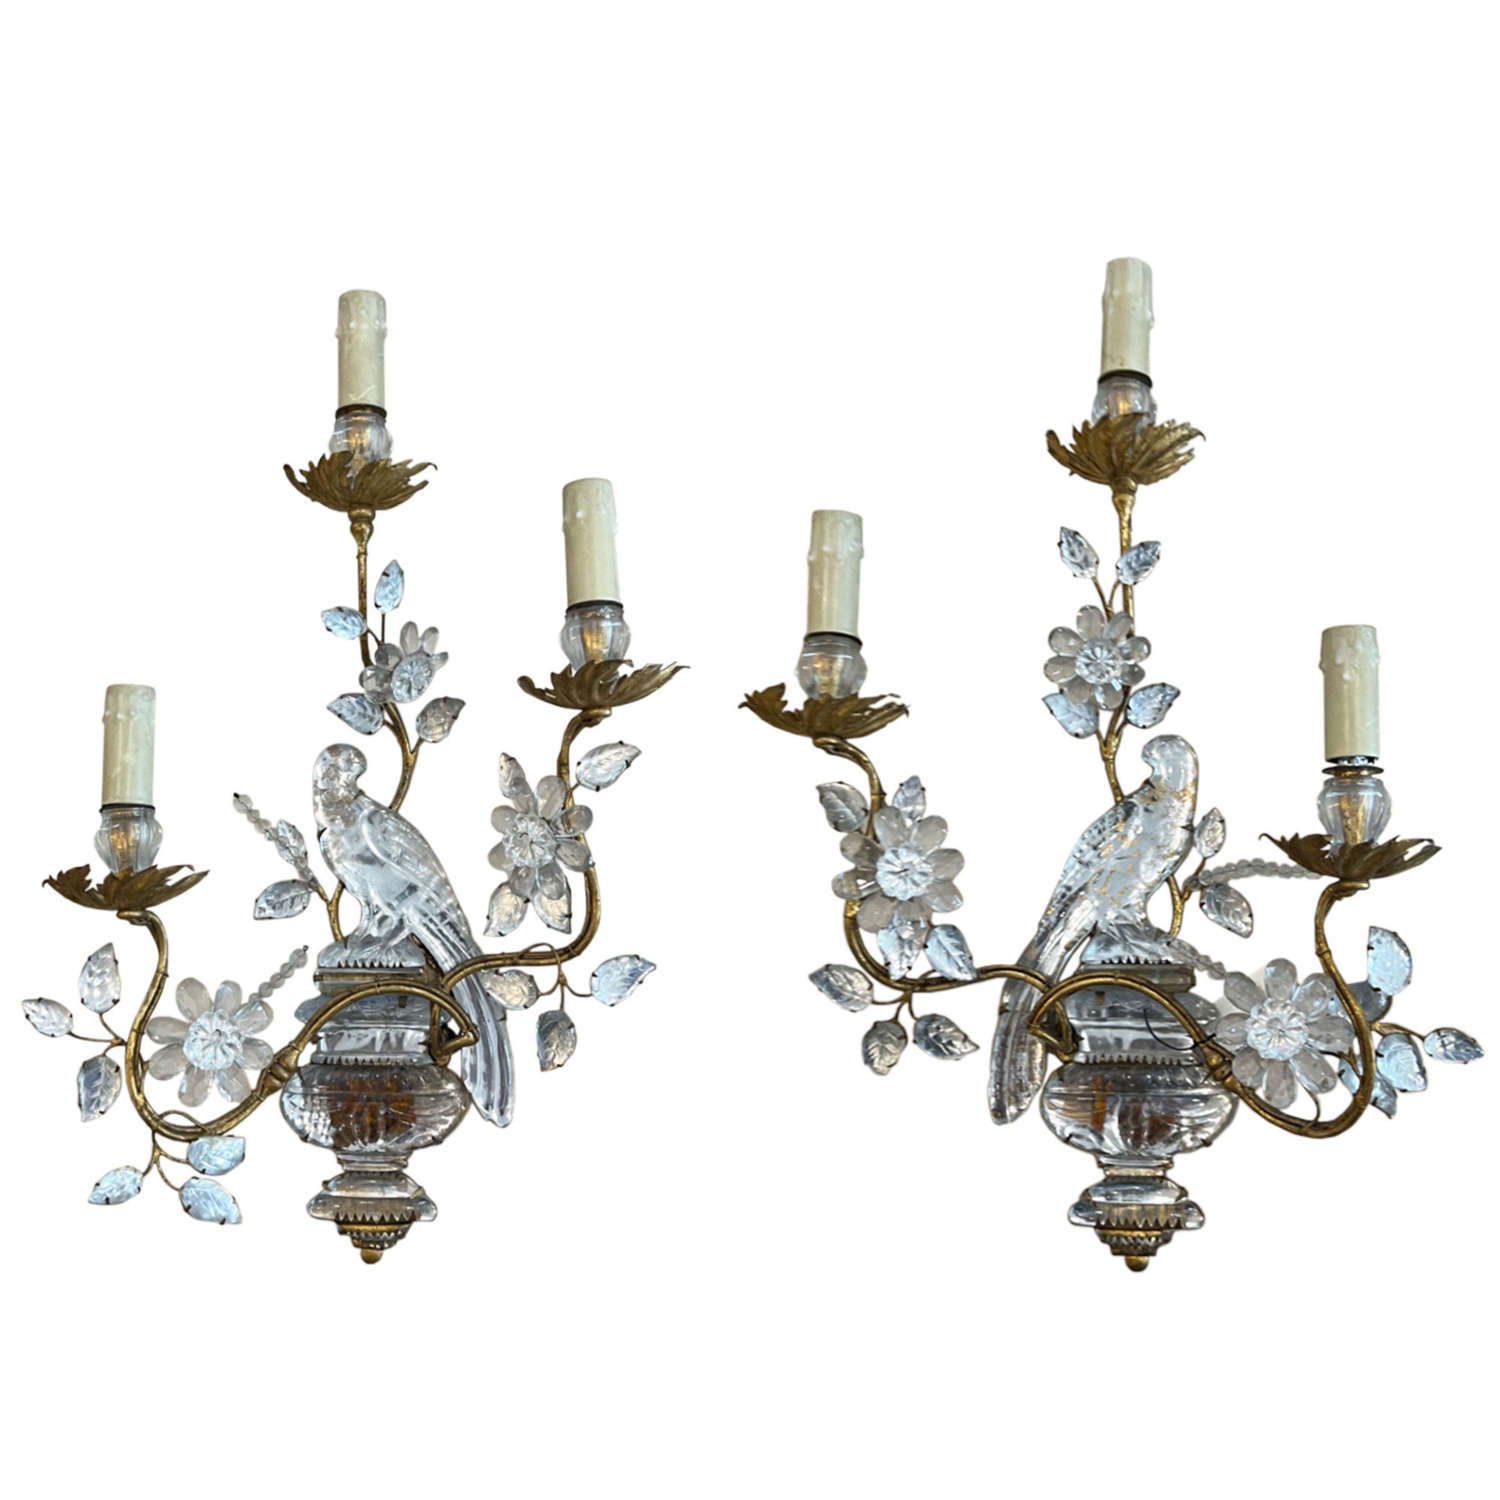 Pair of Large Maison Baguès Wall Sconces With Parrots and Urns